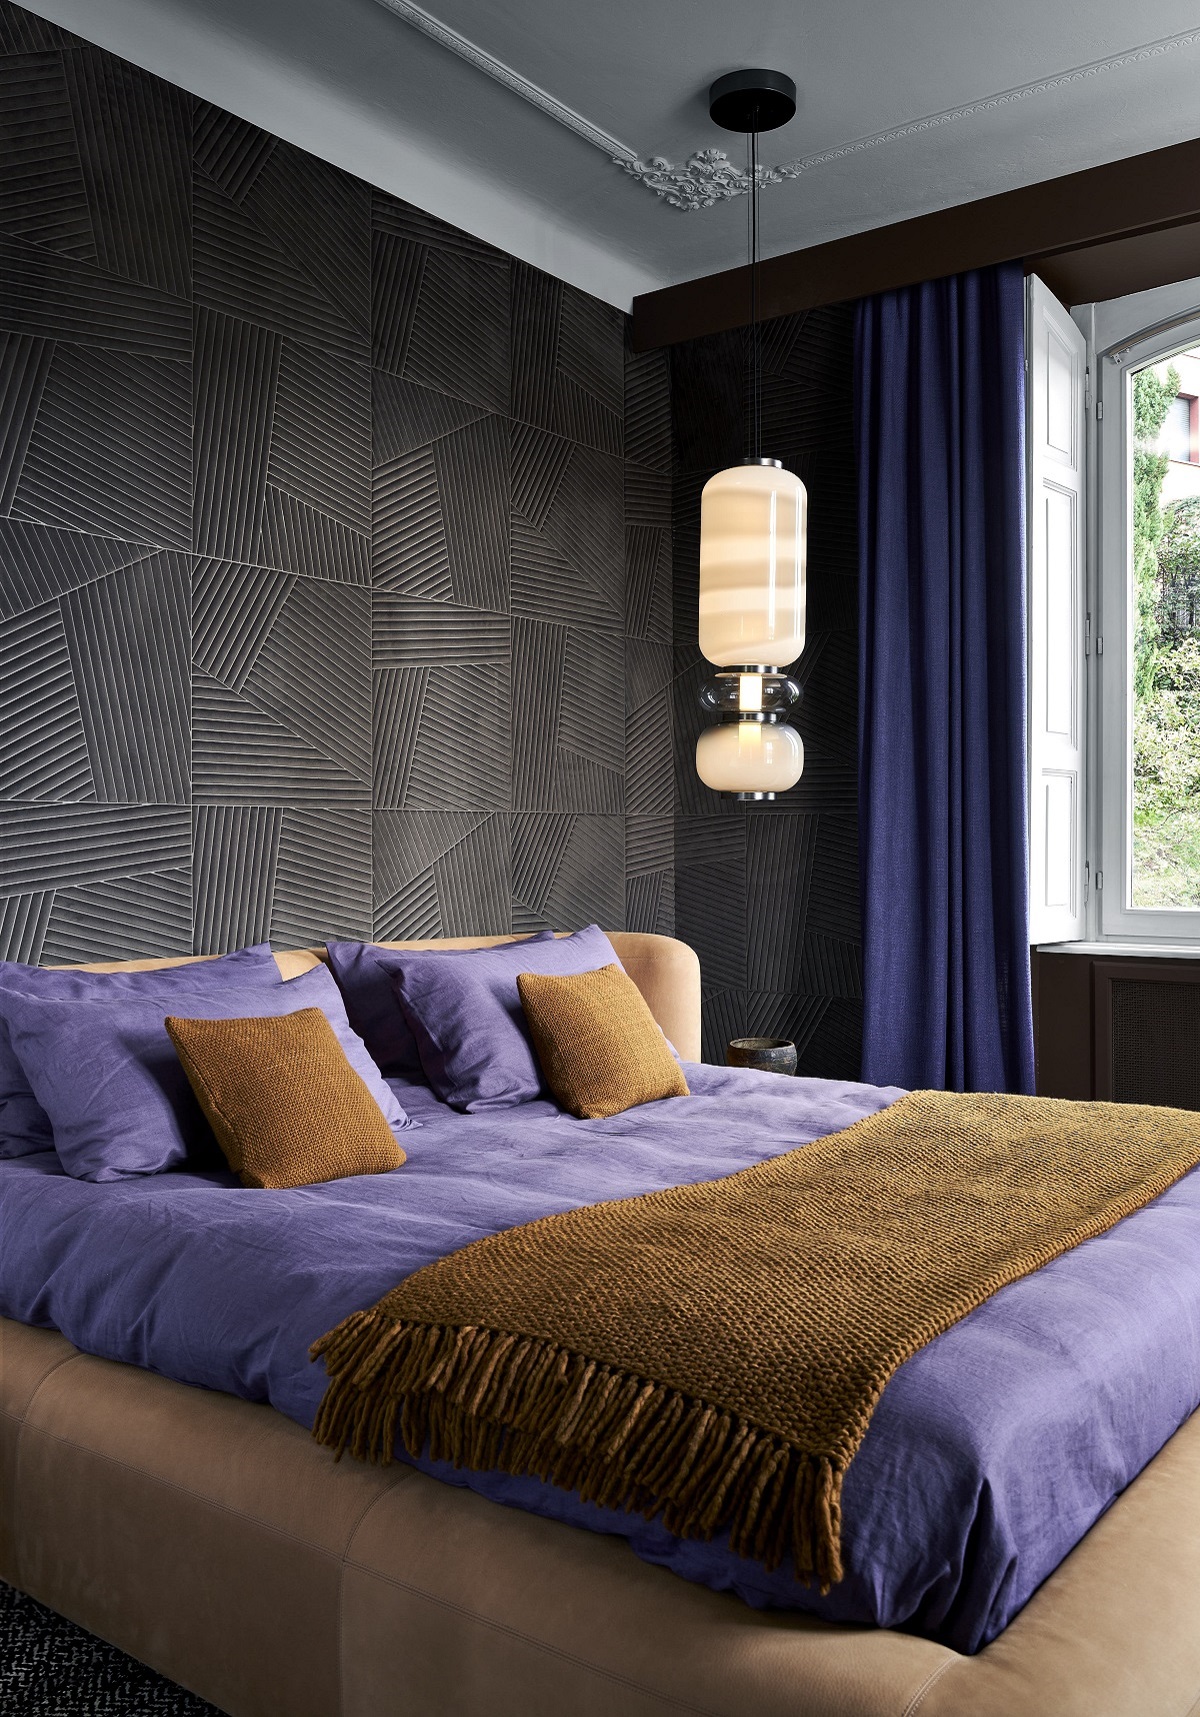 dark grey wall with brown and purple bed covering and statement light above bed